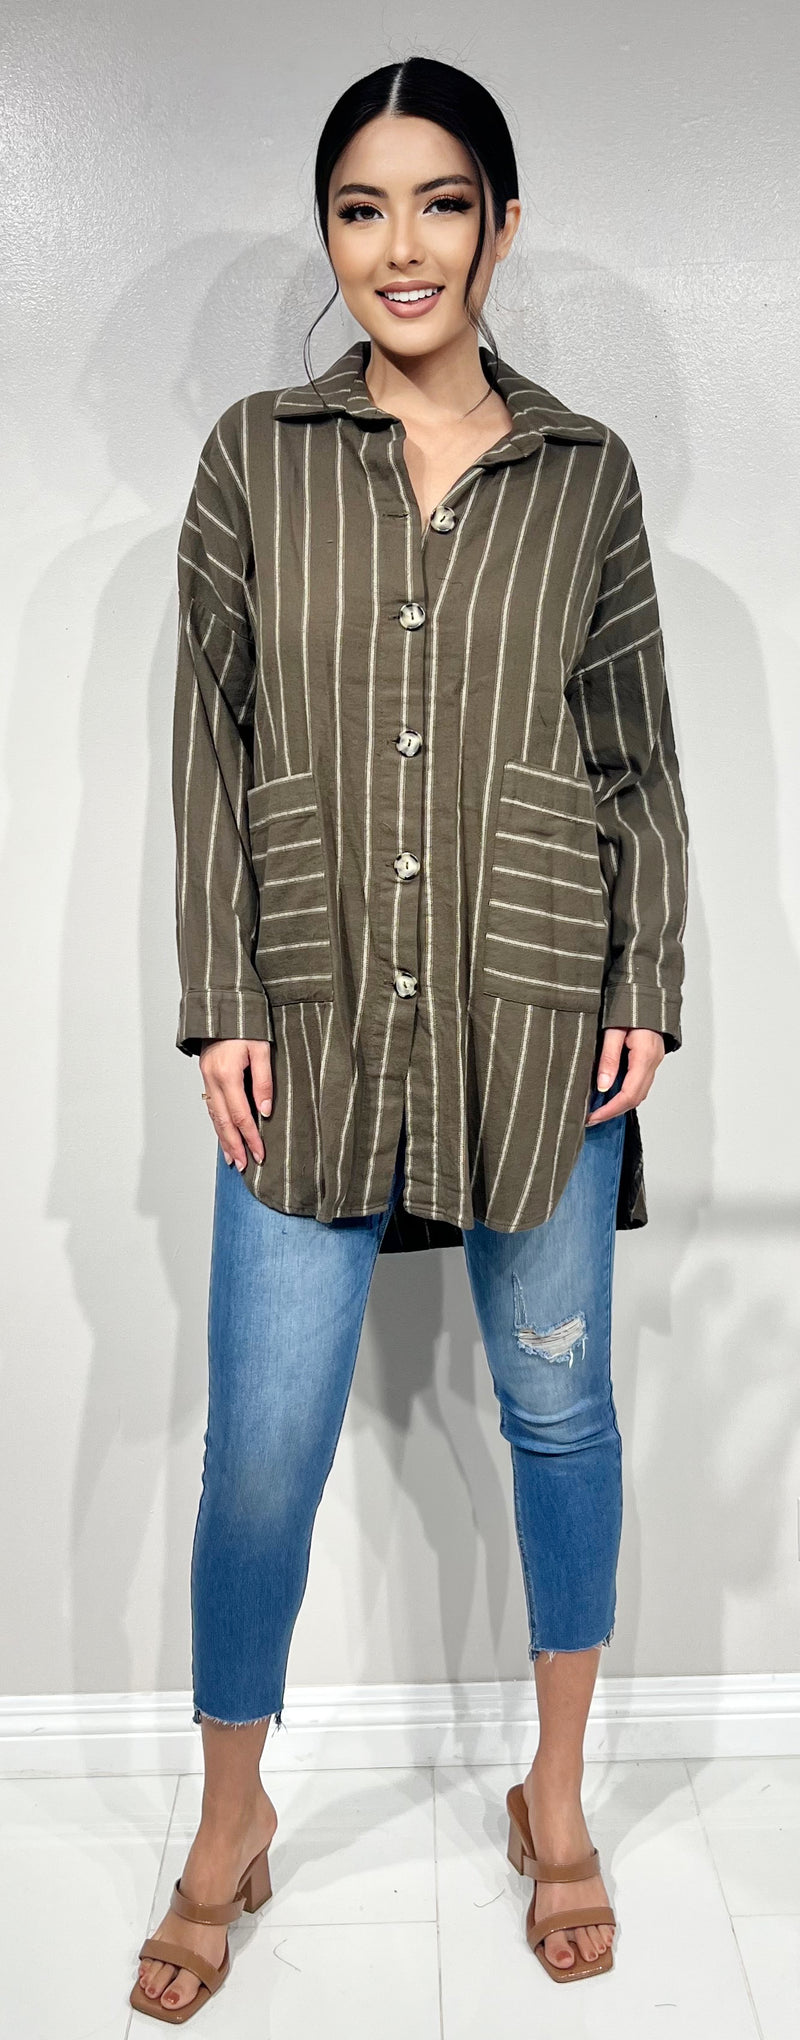 Jeans Warehouse Hawaii - 3/4 & L/S PRINT WOVEN TOPS - LONG SLEEVE STRIPED TUNIC | By FINAL TOUCH